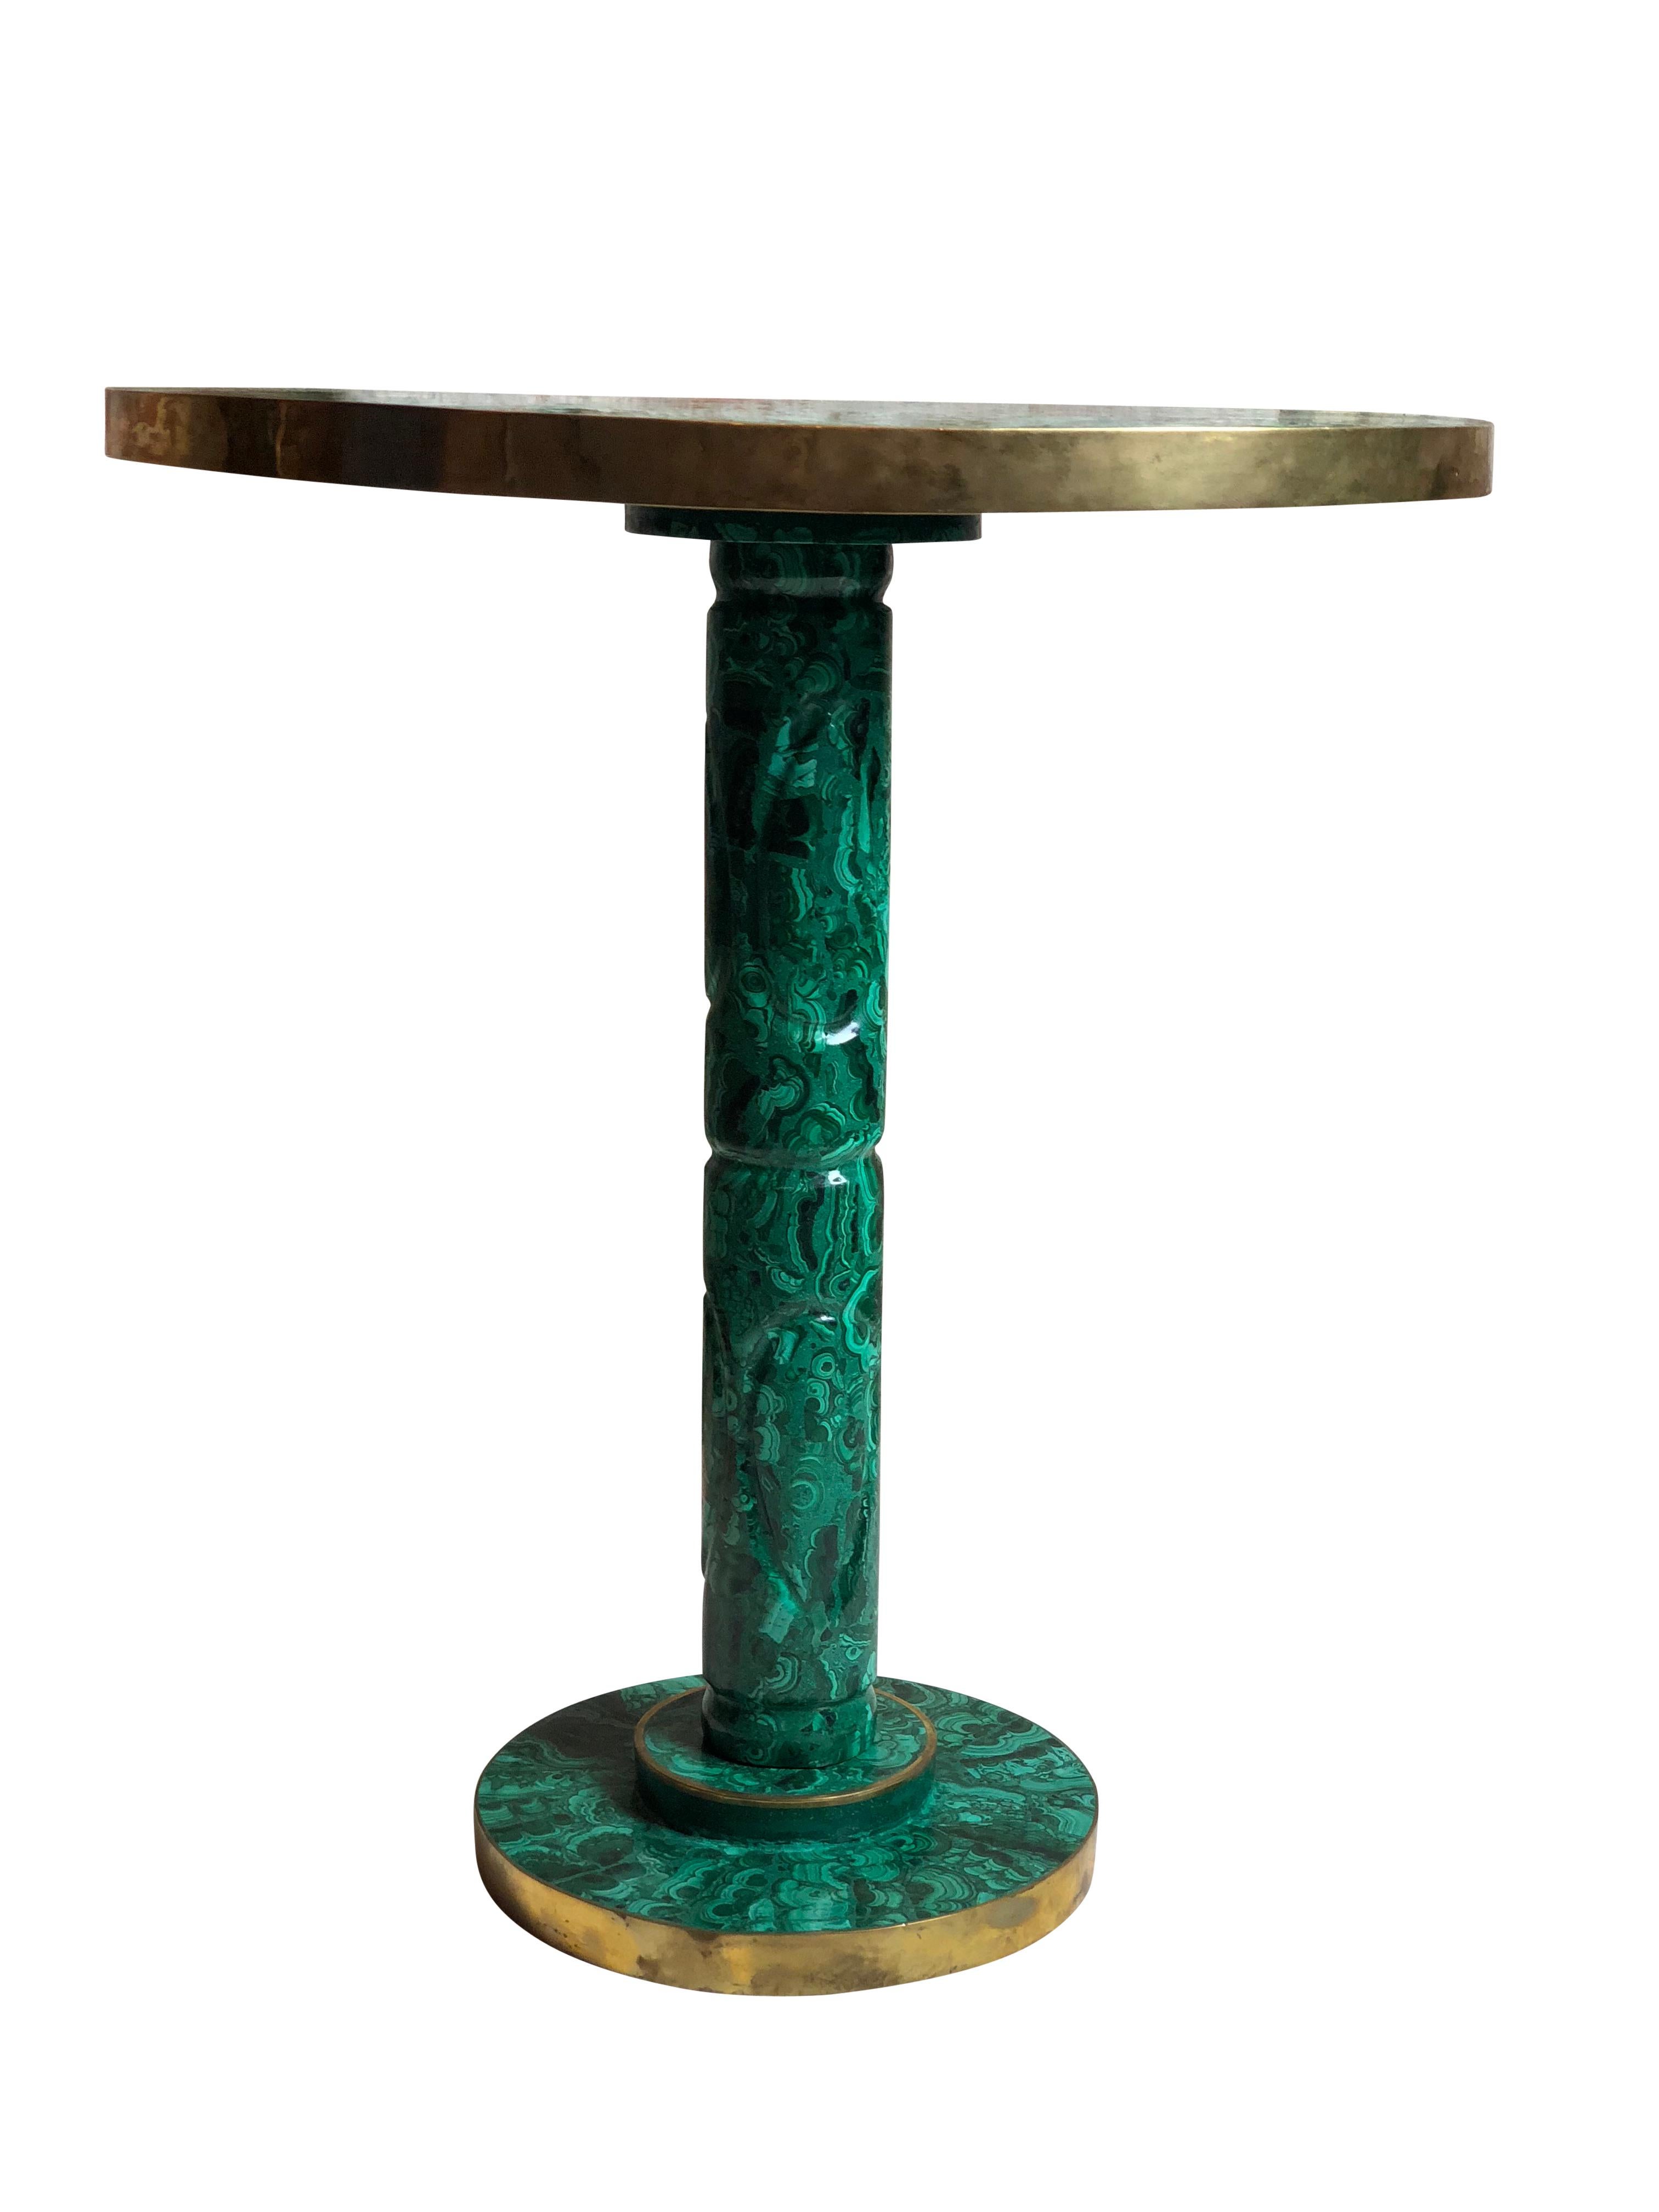 A vintage Russian malachite side or occasional table

Having malachite throughout the table including under the base and under the circular top table area, with a polished brass rim along the border of the table

Dimensions: Height: 20.5